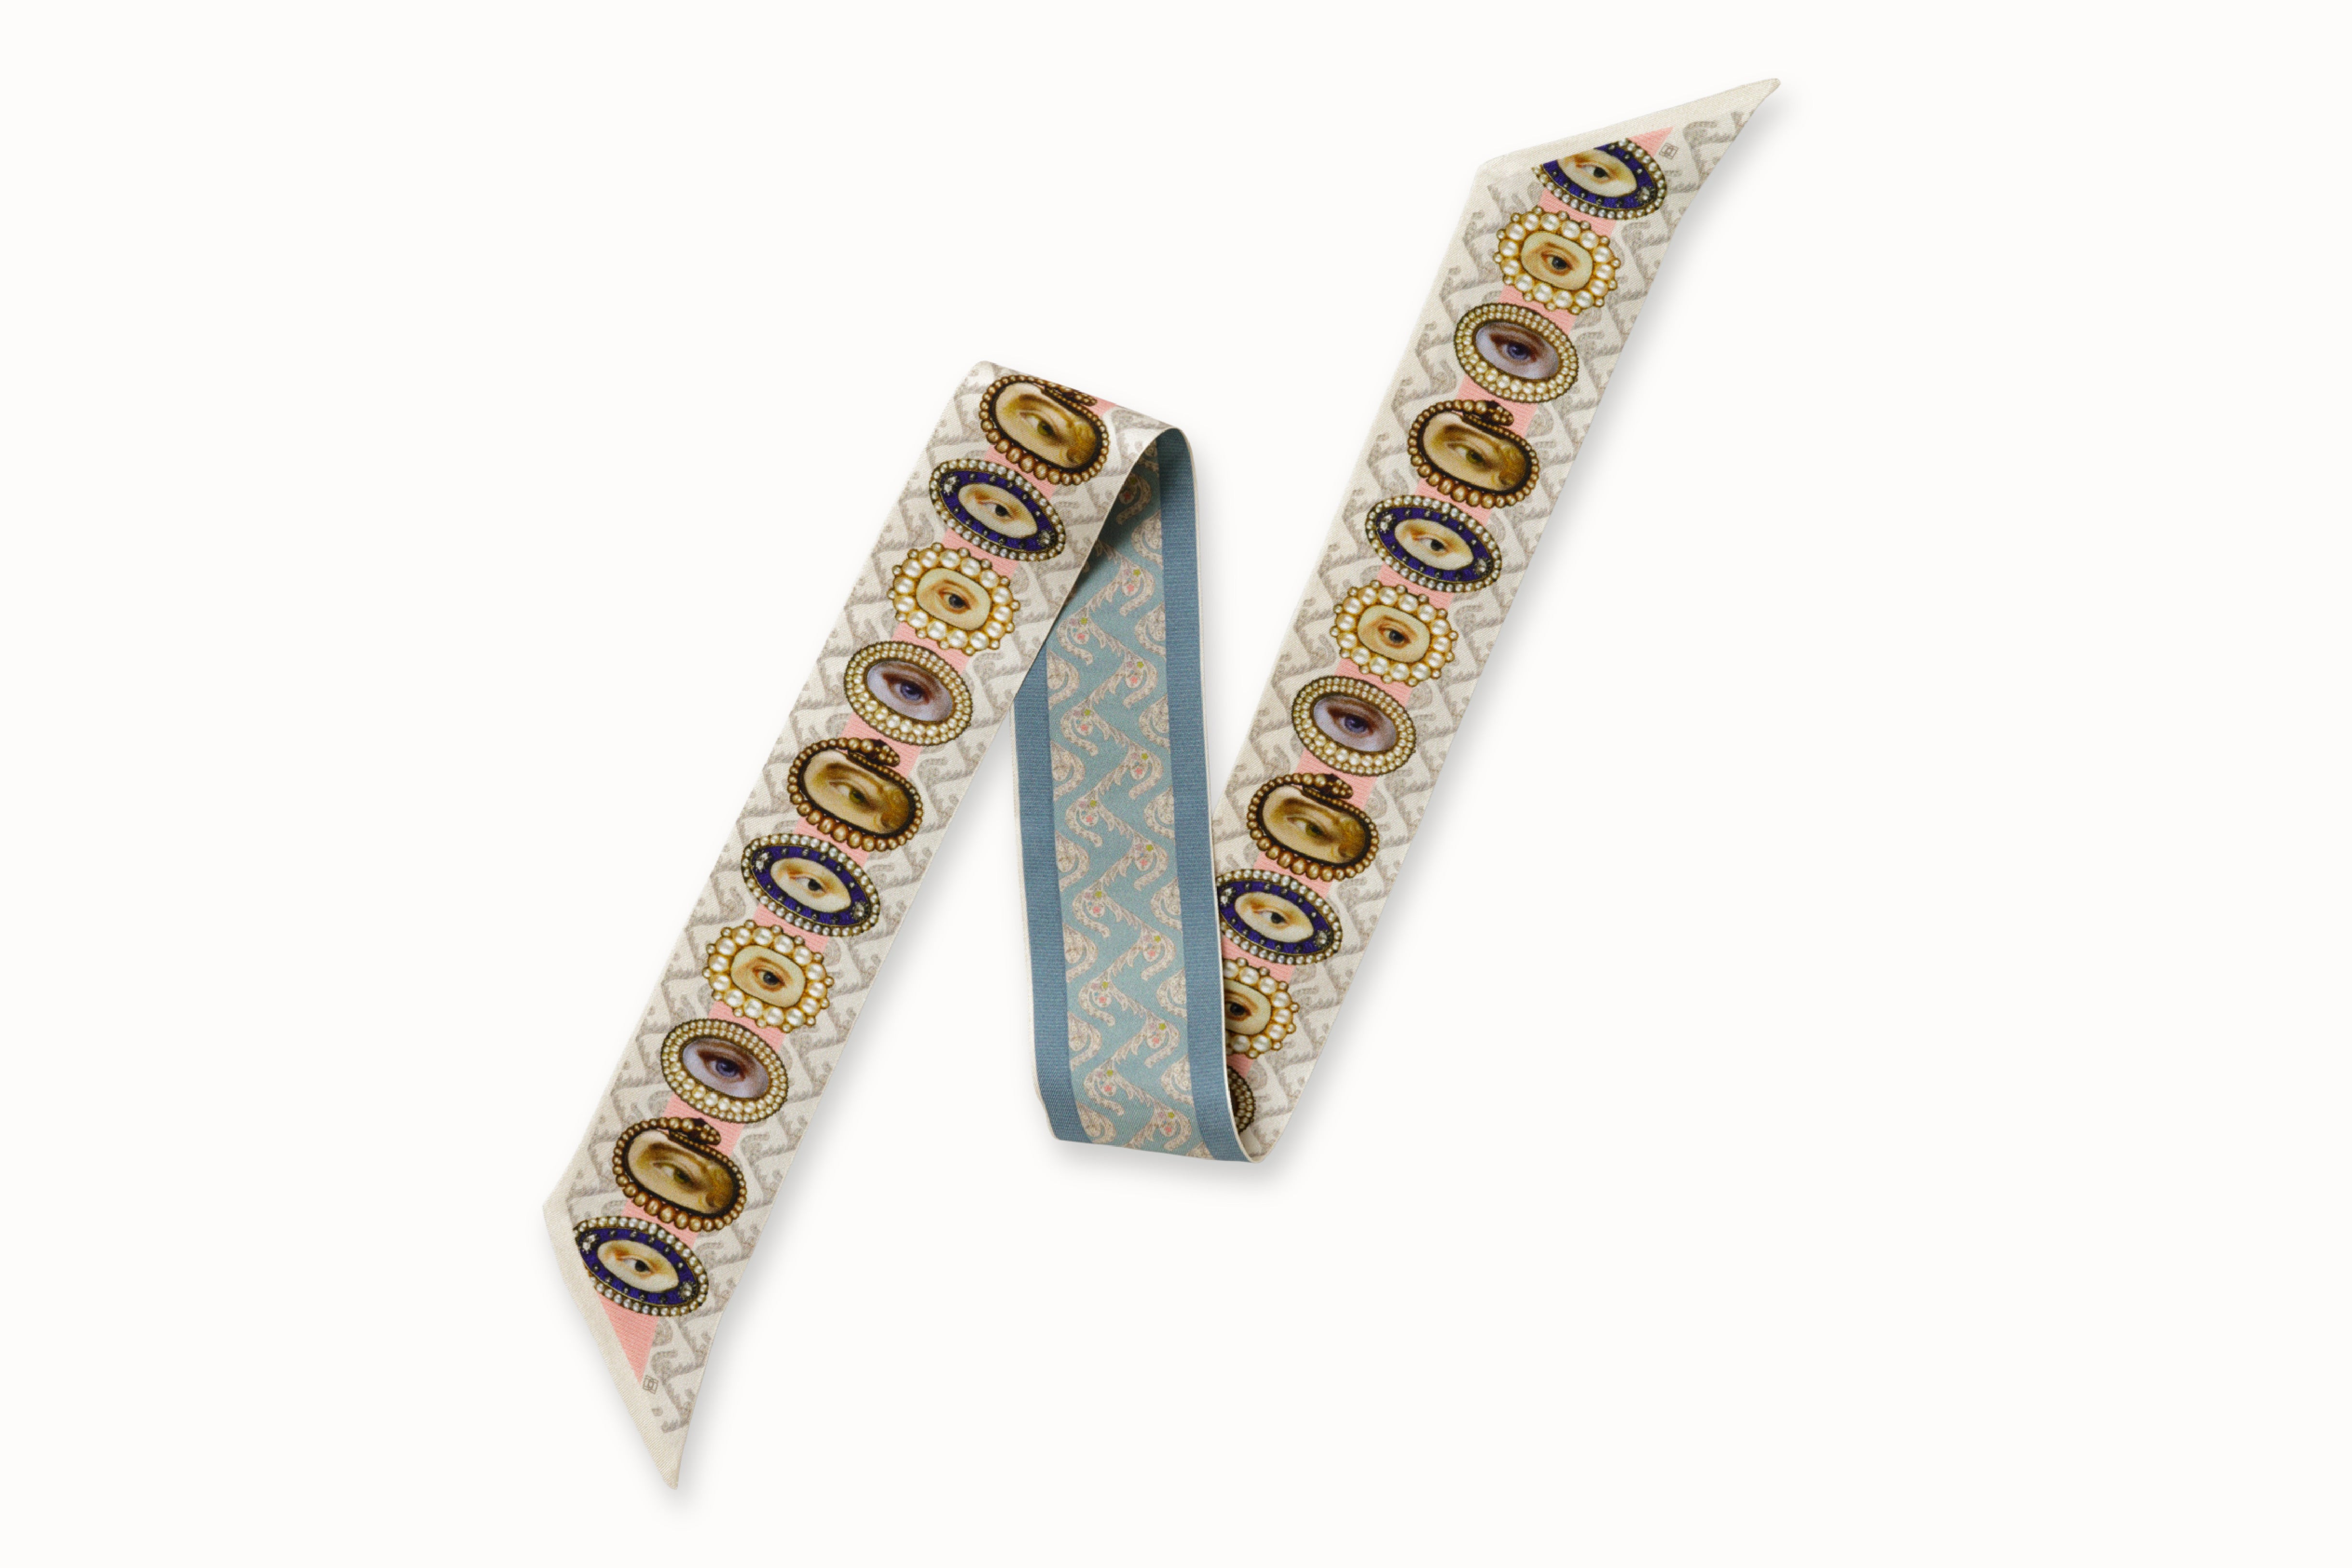 Flatlay image of 100% silk ribbon style scarf, 2” wide by 32” long, folded in a zig-zag shape. Design features a series of hand-painted lover's eye jewels on one side and hand drawn wallpaper design with a floral motif in a soft blue tone on the other side.